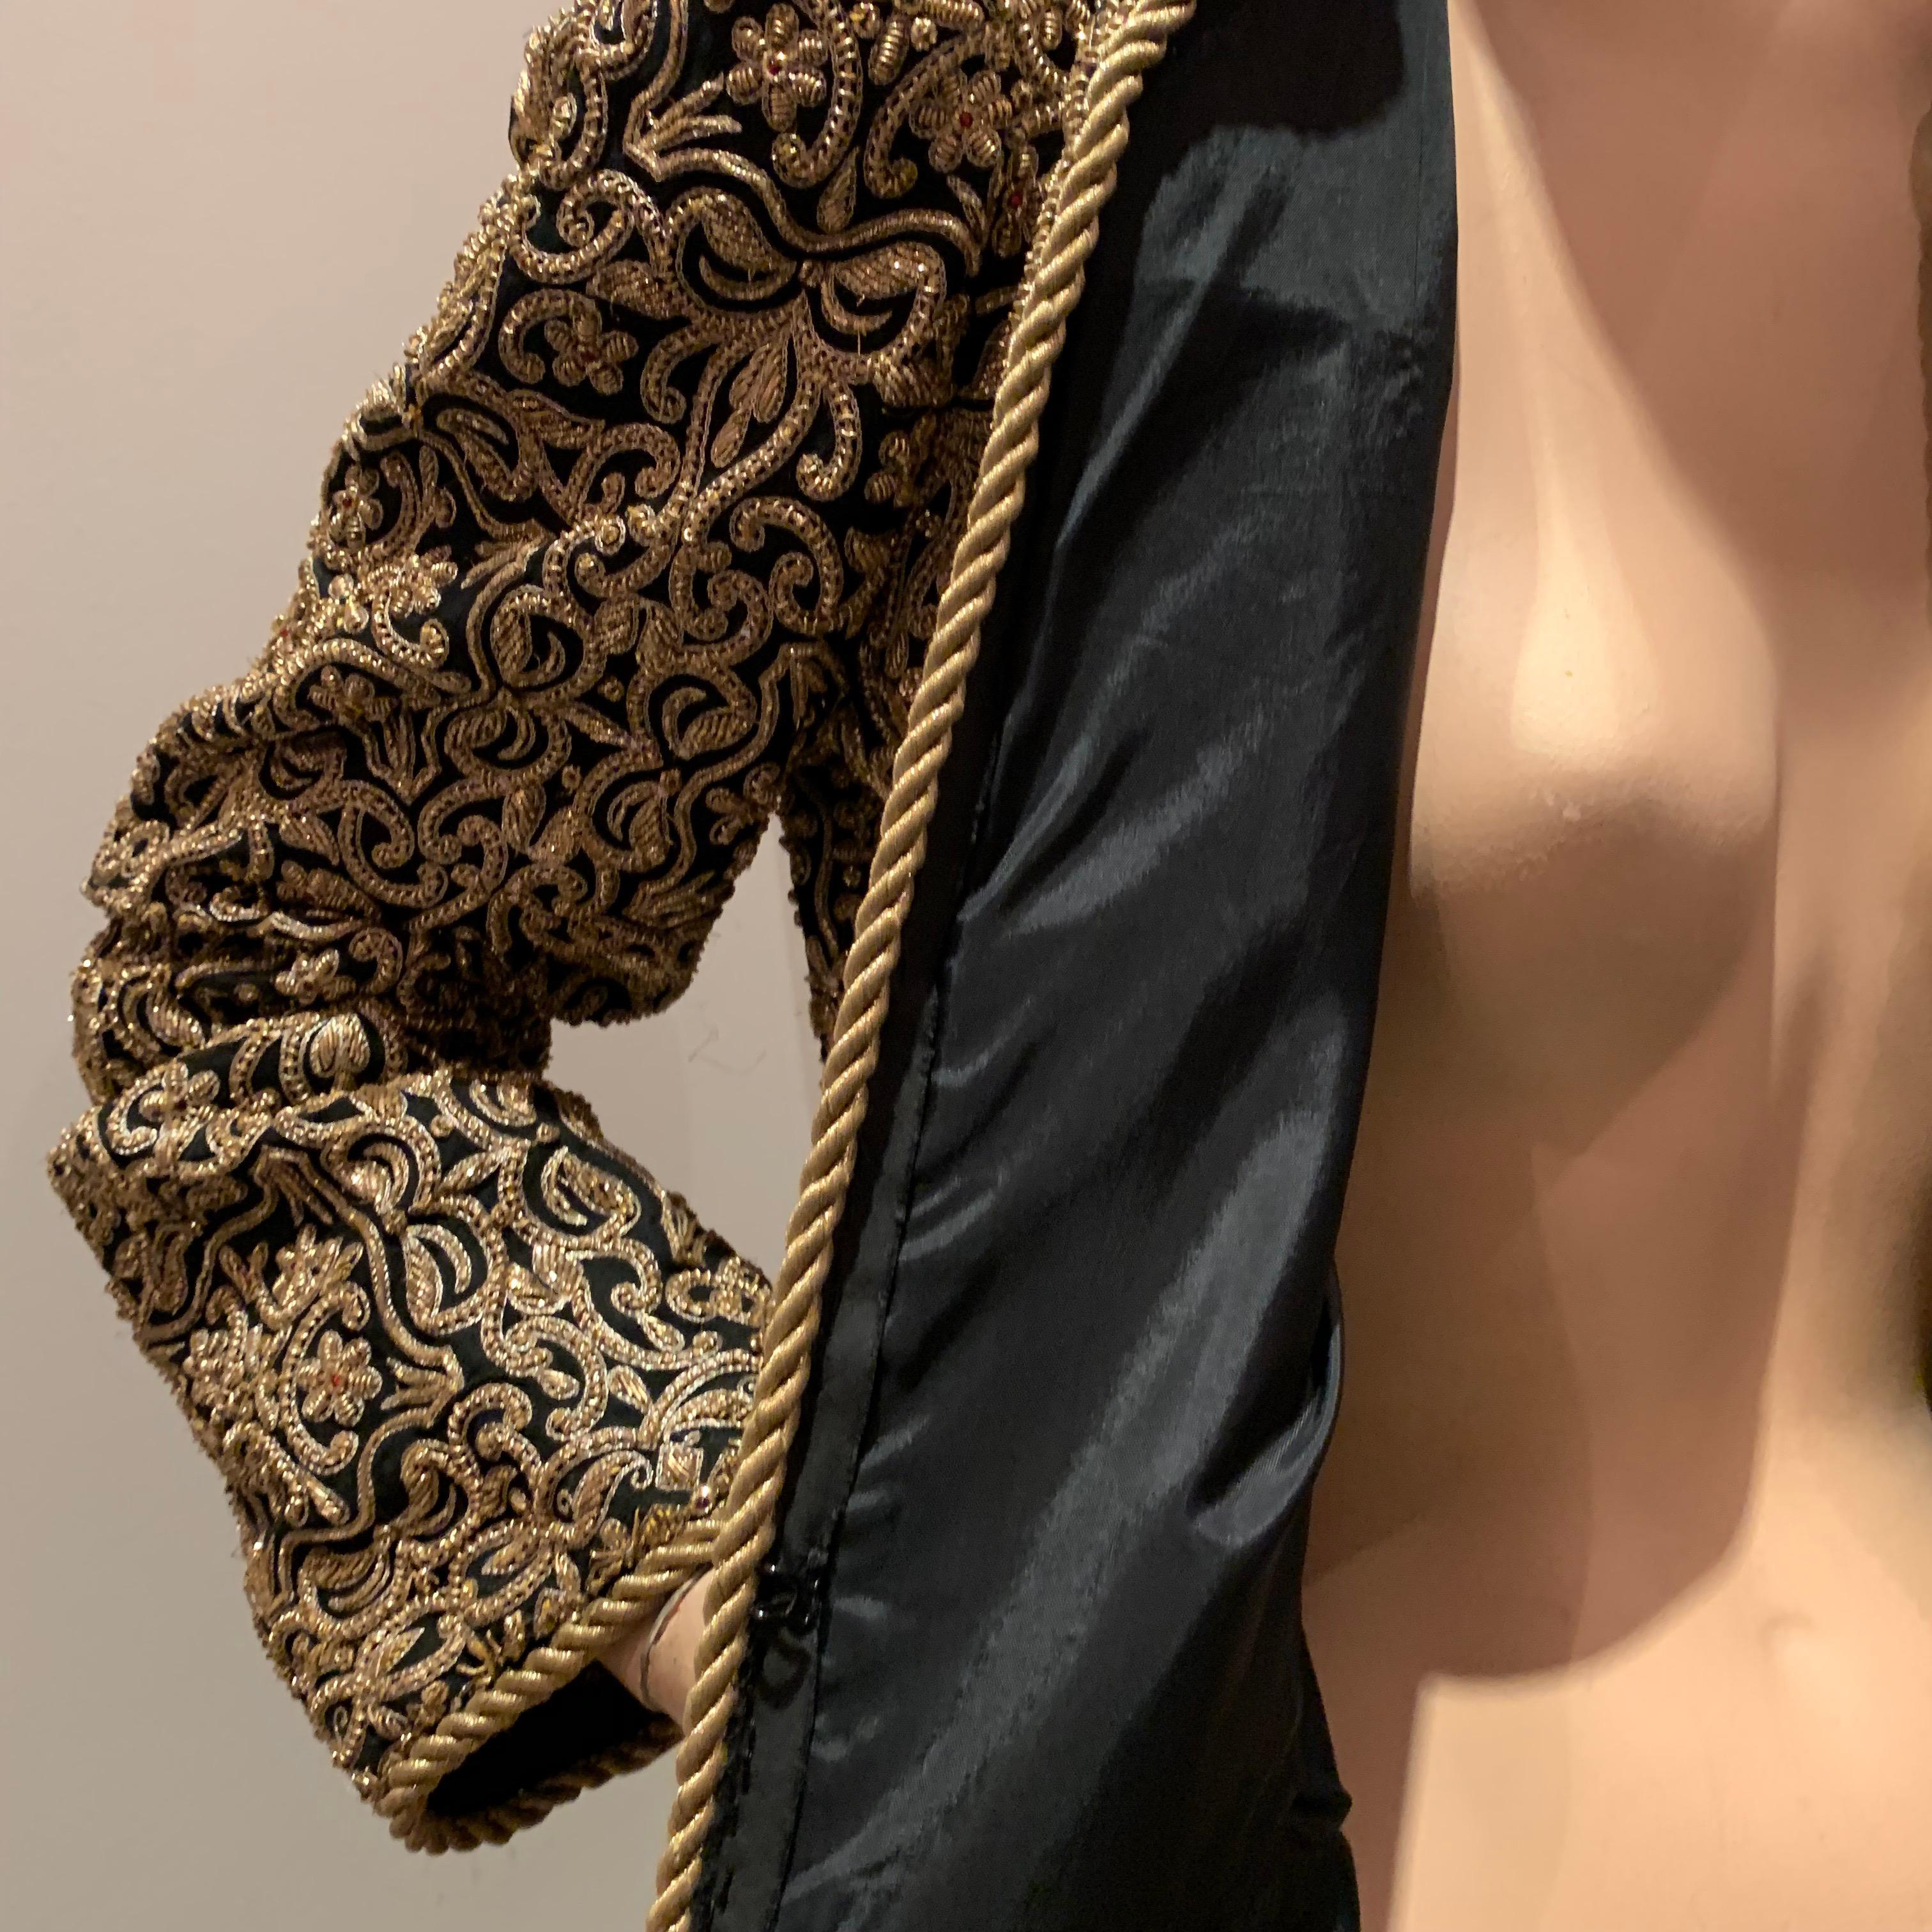 1980s  Bill Blass Evening Jacket W/ Heavily Encrusted Chain Embriodery Gold Work For Sale 7